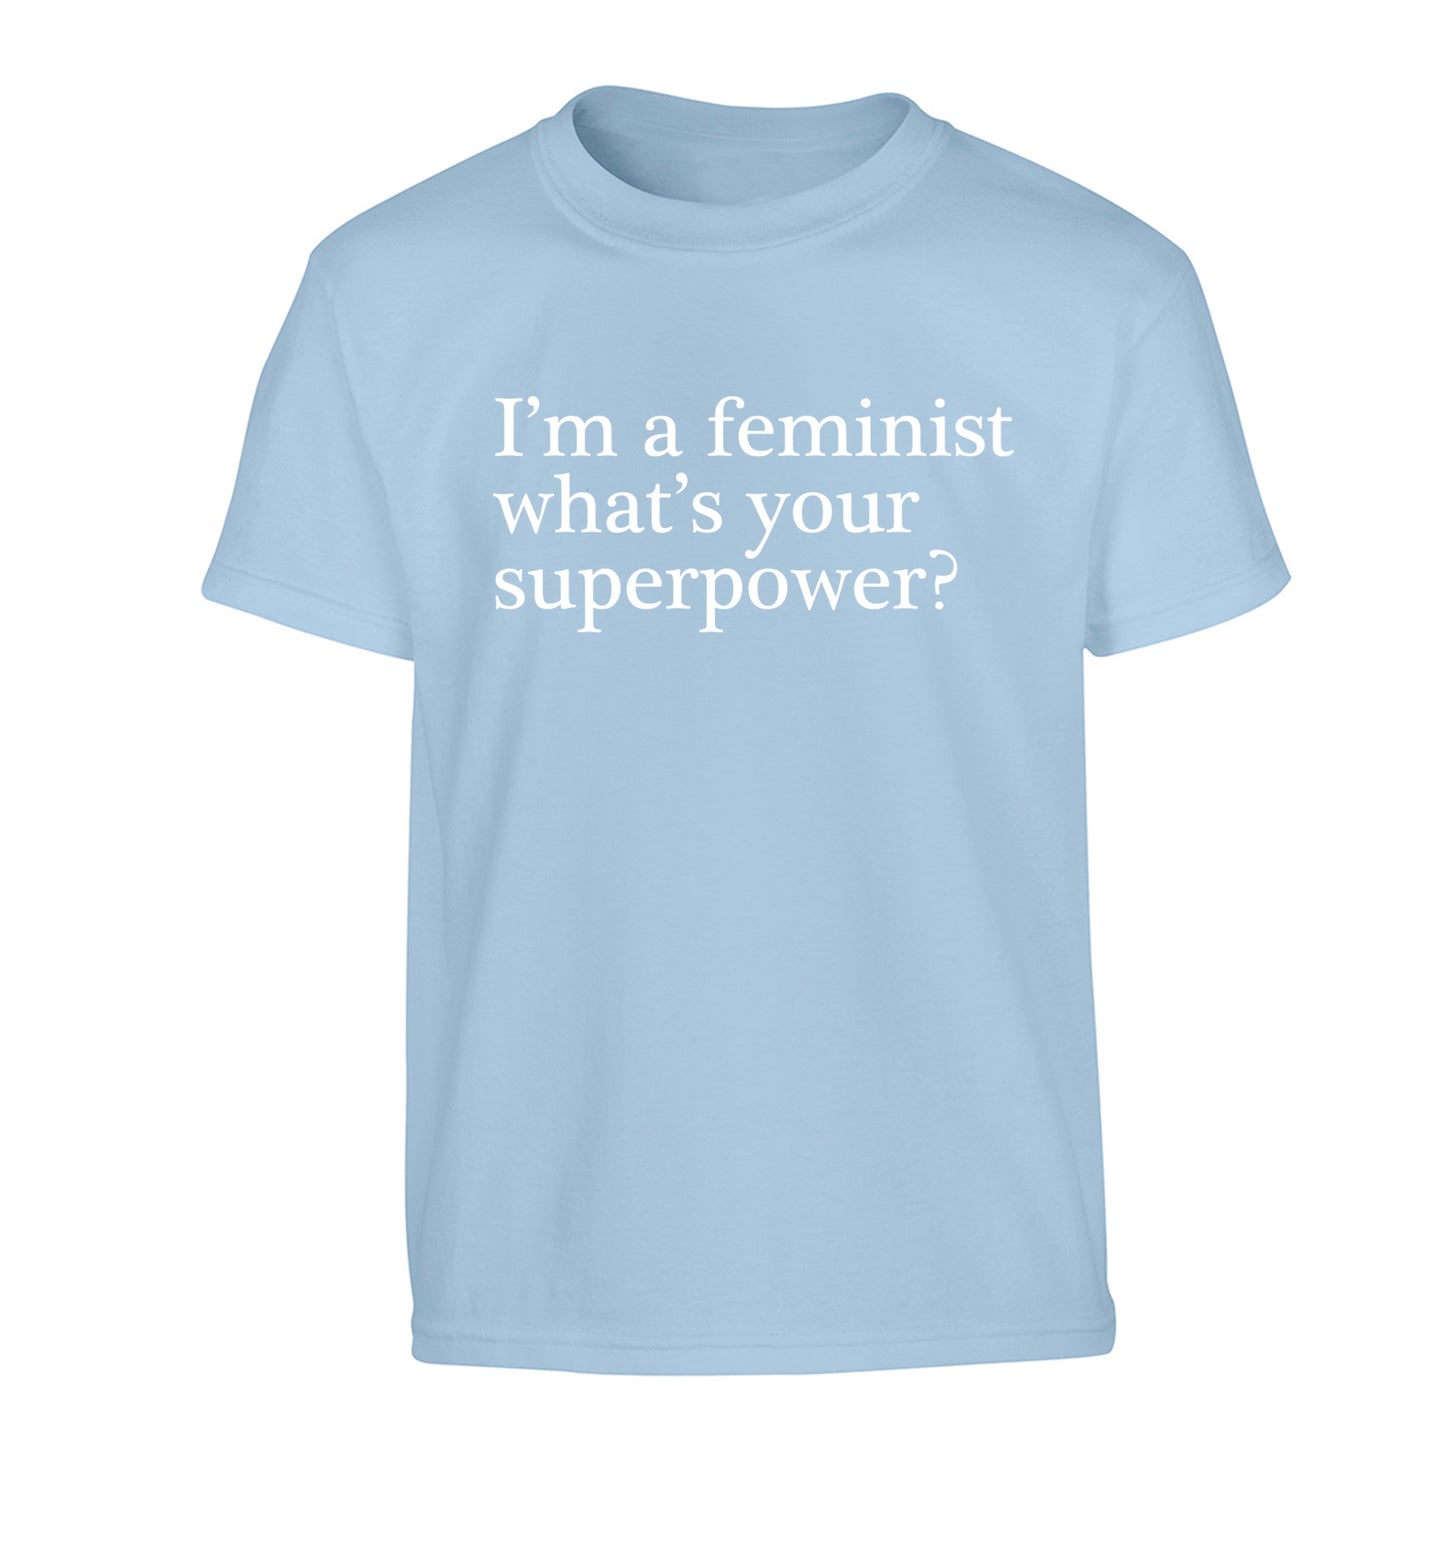 I'm a feminist what's your superpower? Children's light blue Tshirt 12-14 Years